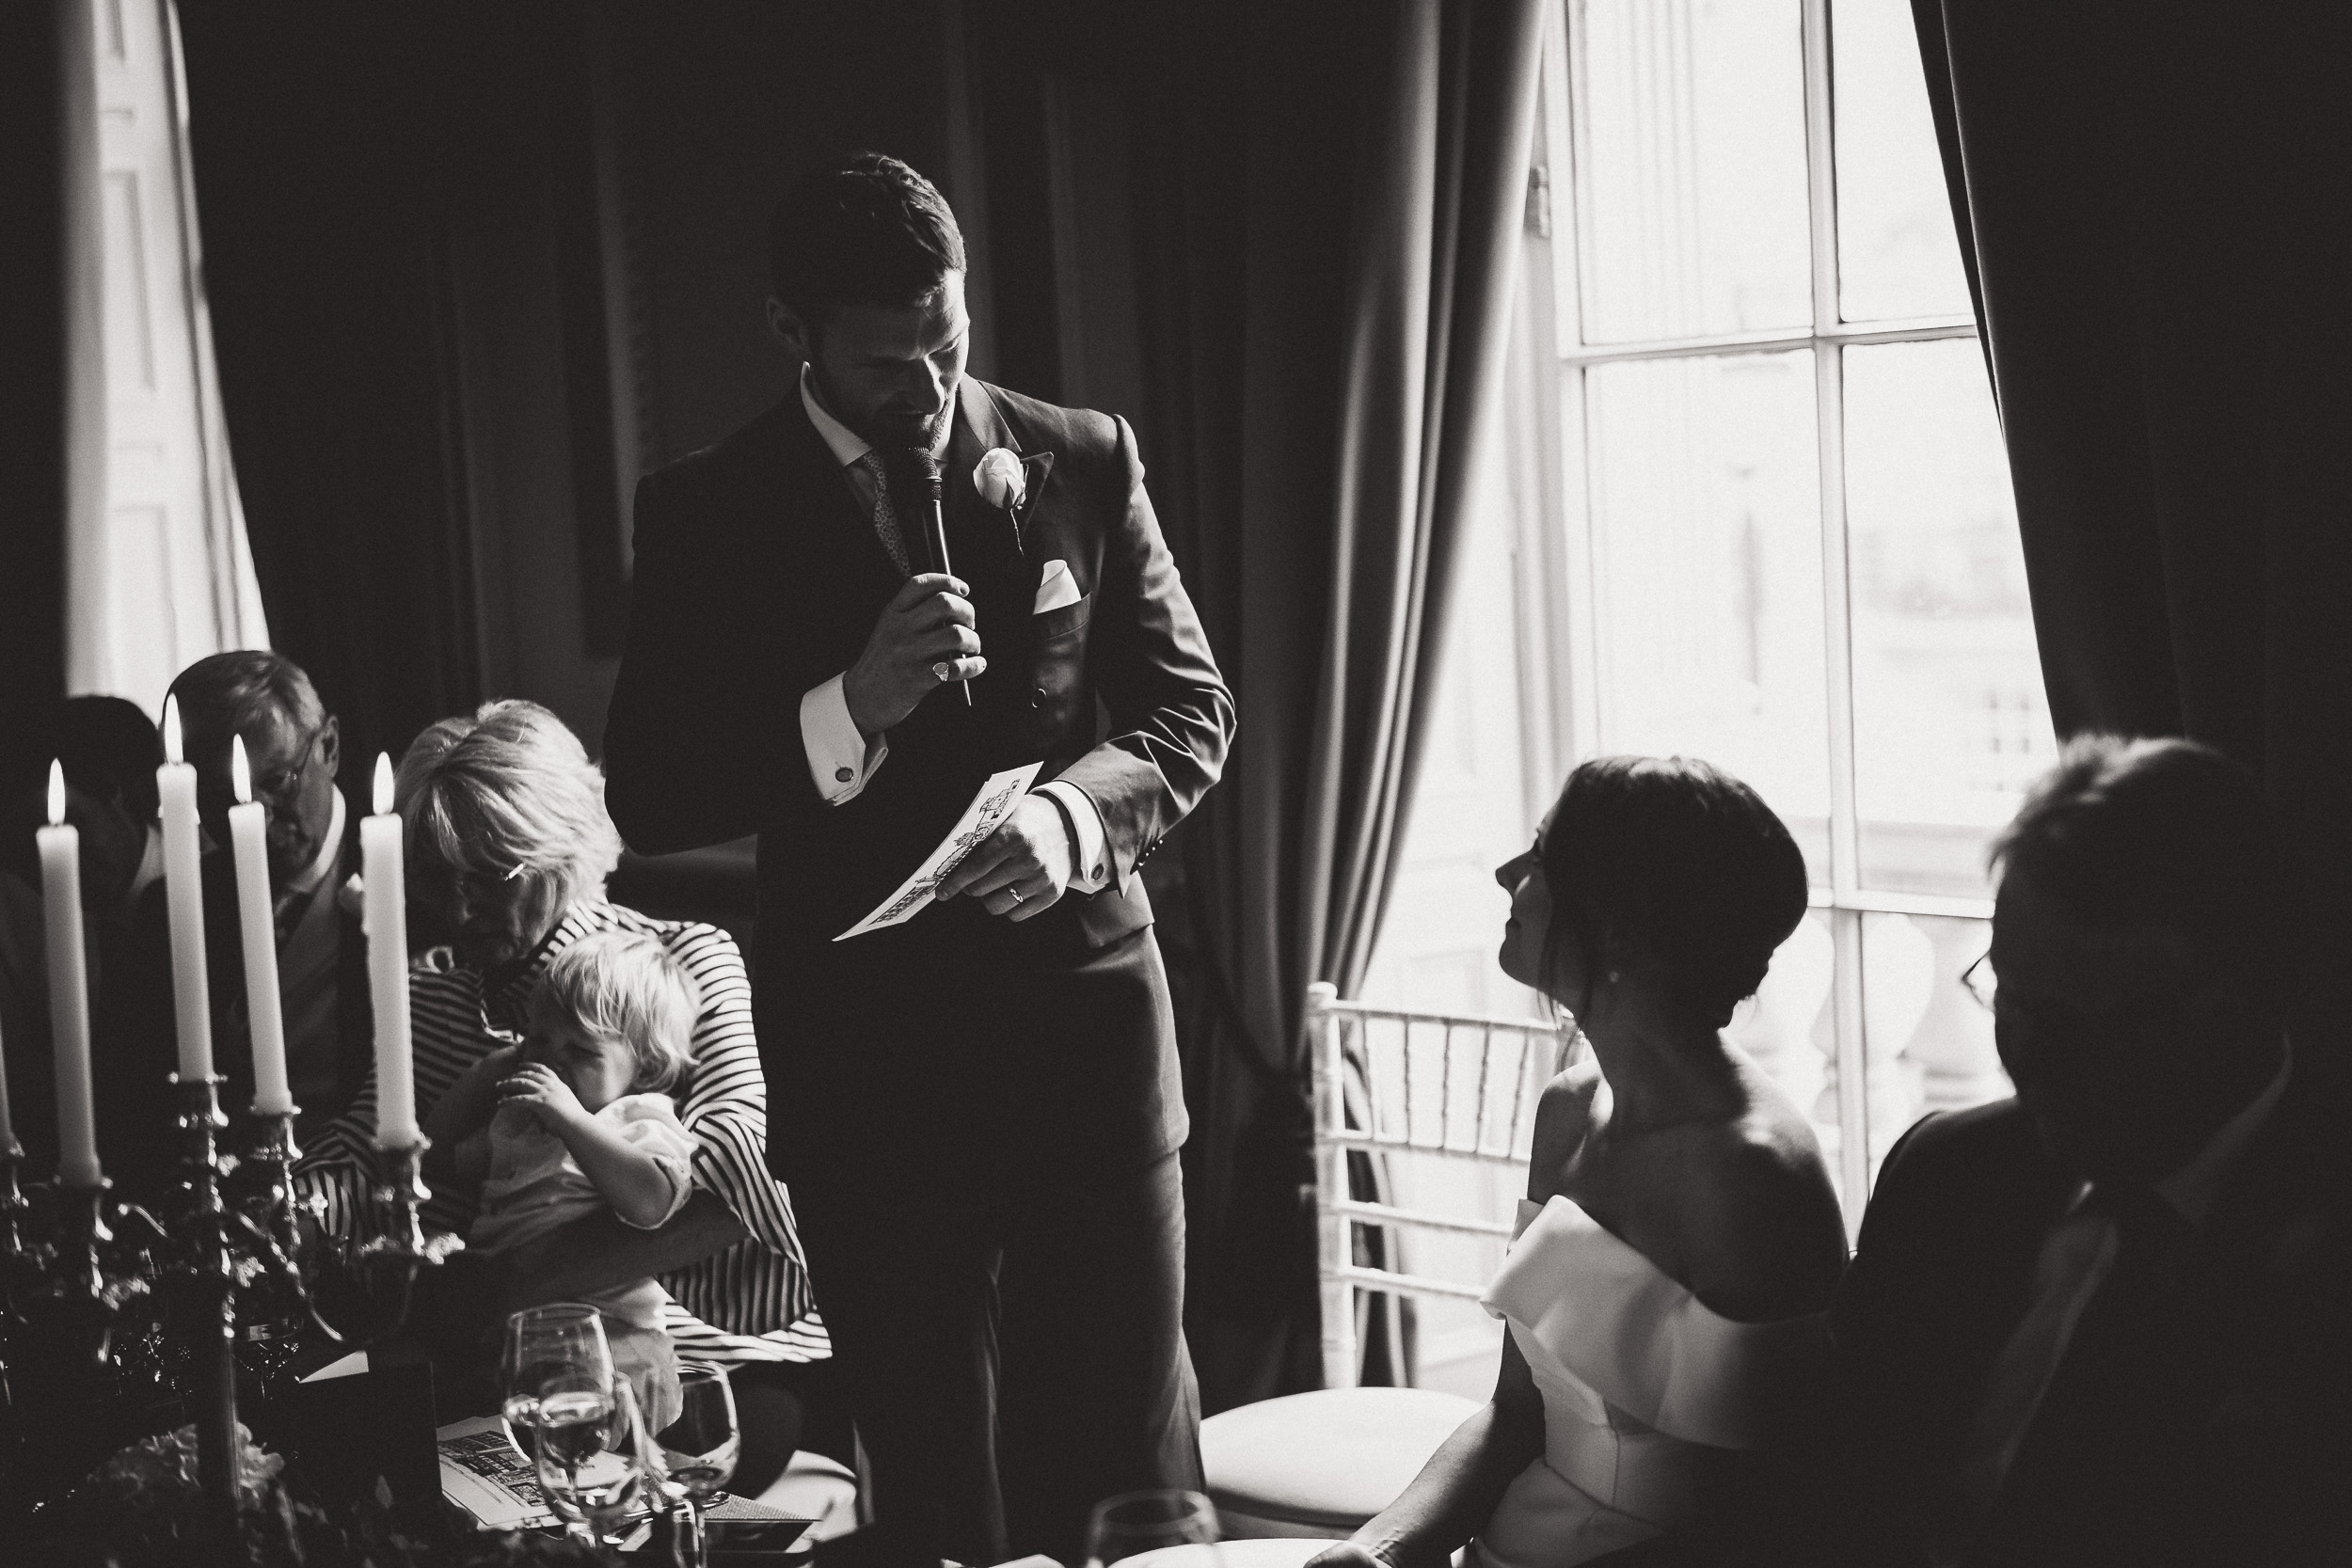 A black and white photo capturing the groom delivering a speech at a wedding.